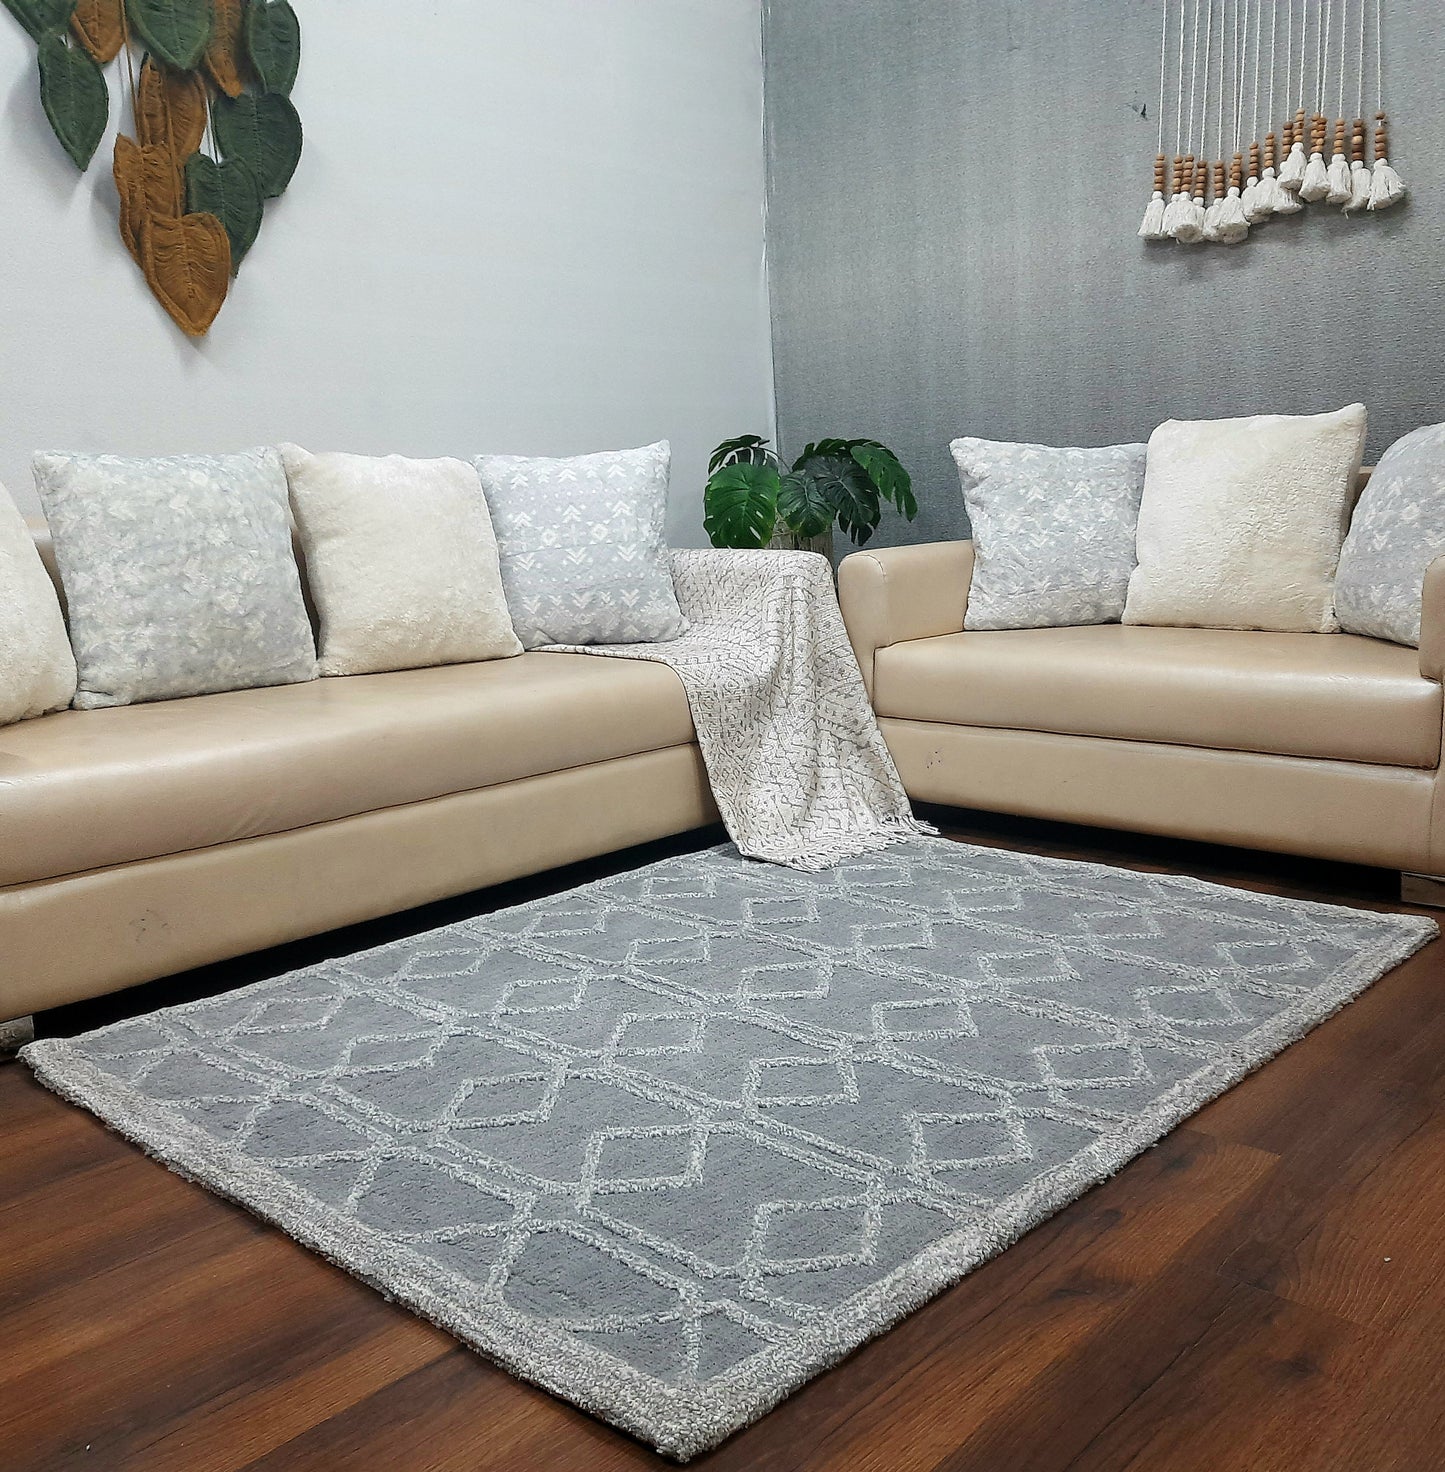 Avioni Modern Collection- Plush Grey Carpet with 3d Ethnic Design -Different Sizes Shaggy Fluffy Rugs and Carpet for Living Room